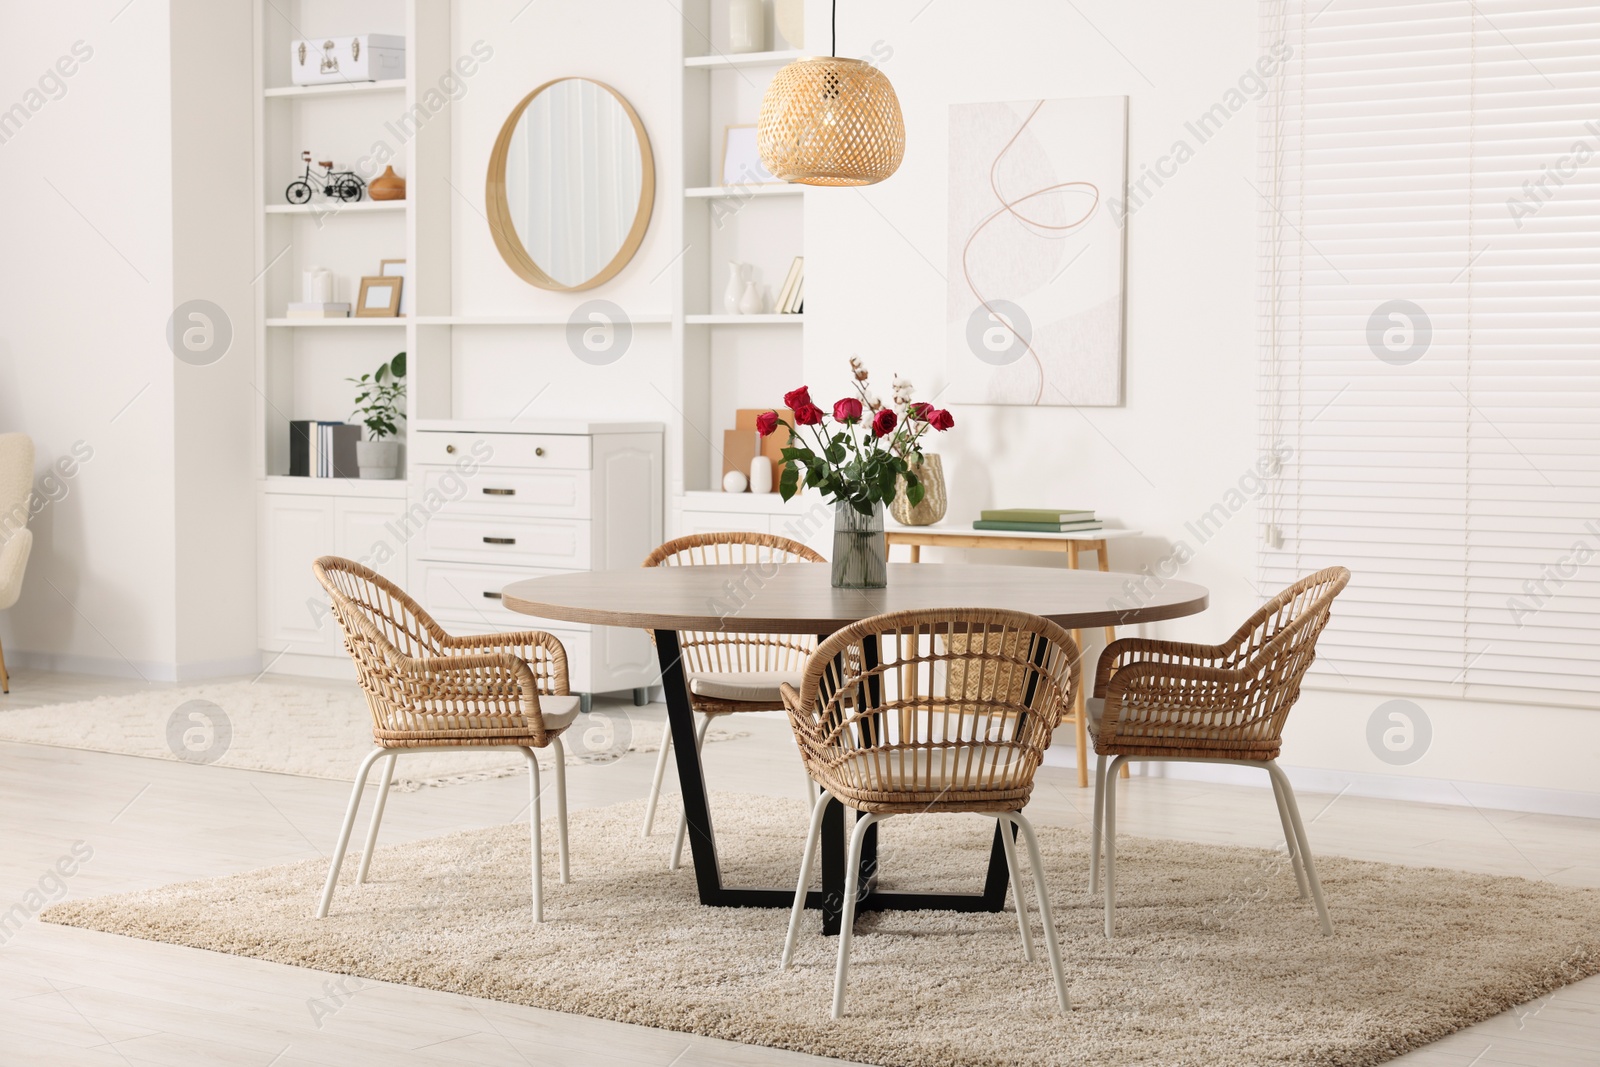 Photo of Stylish dining room interior with table and chairs